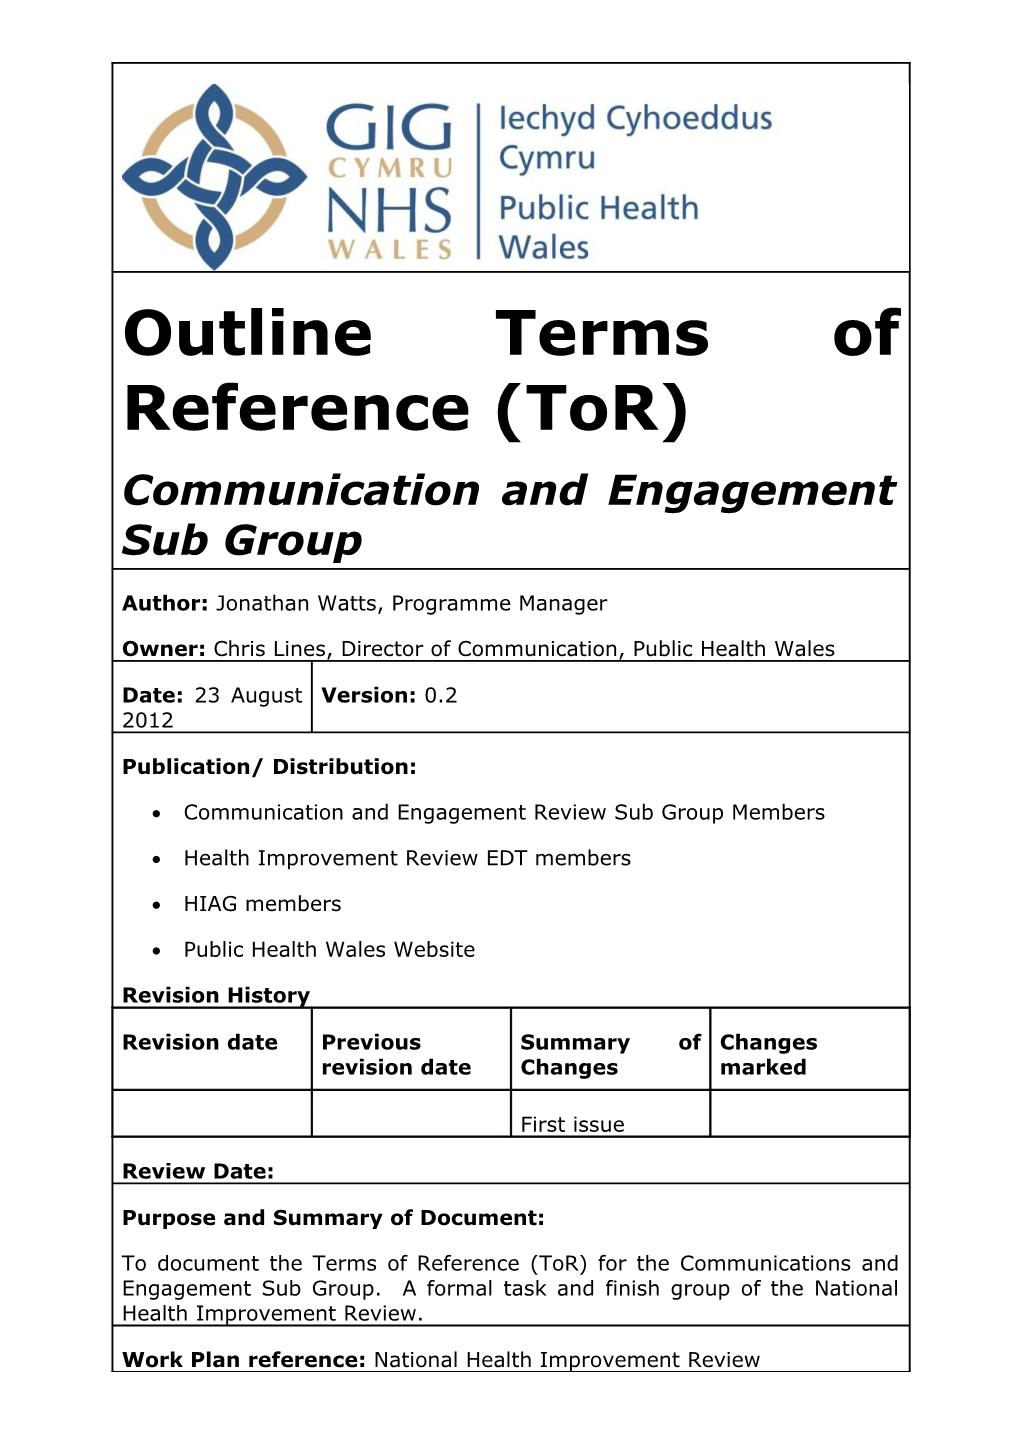 Communication and Engagement Review Sub Group Members